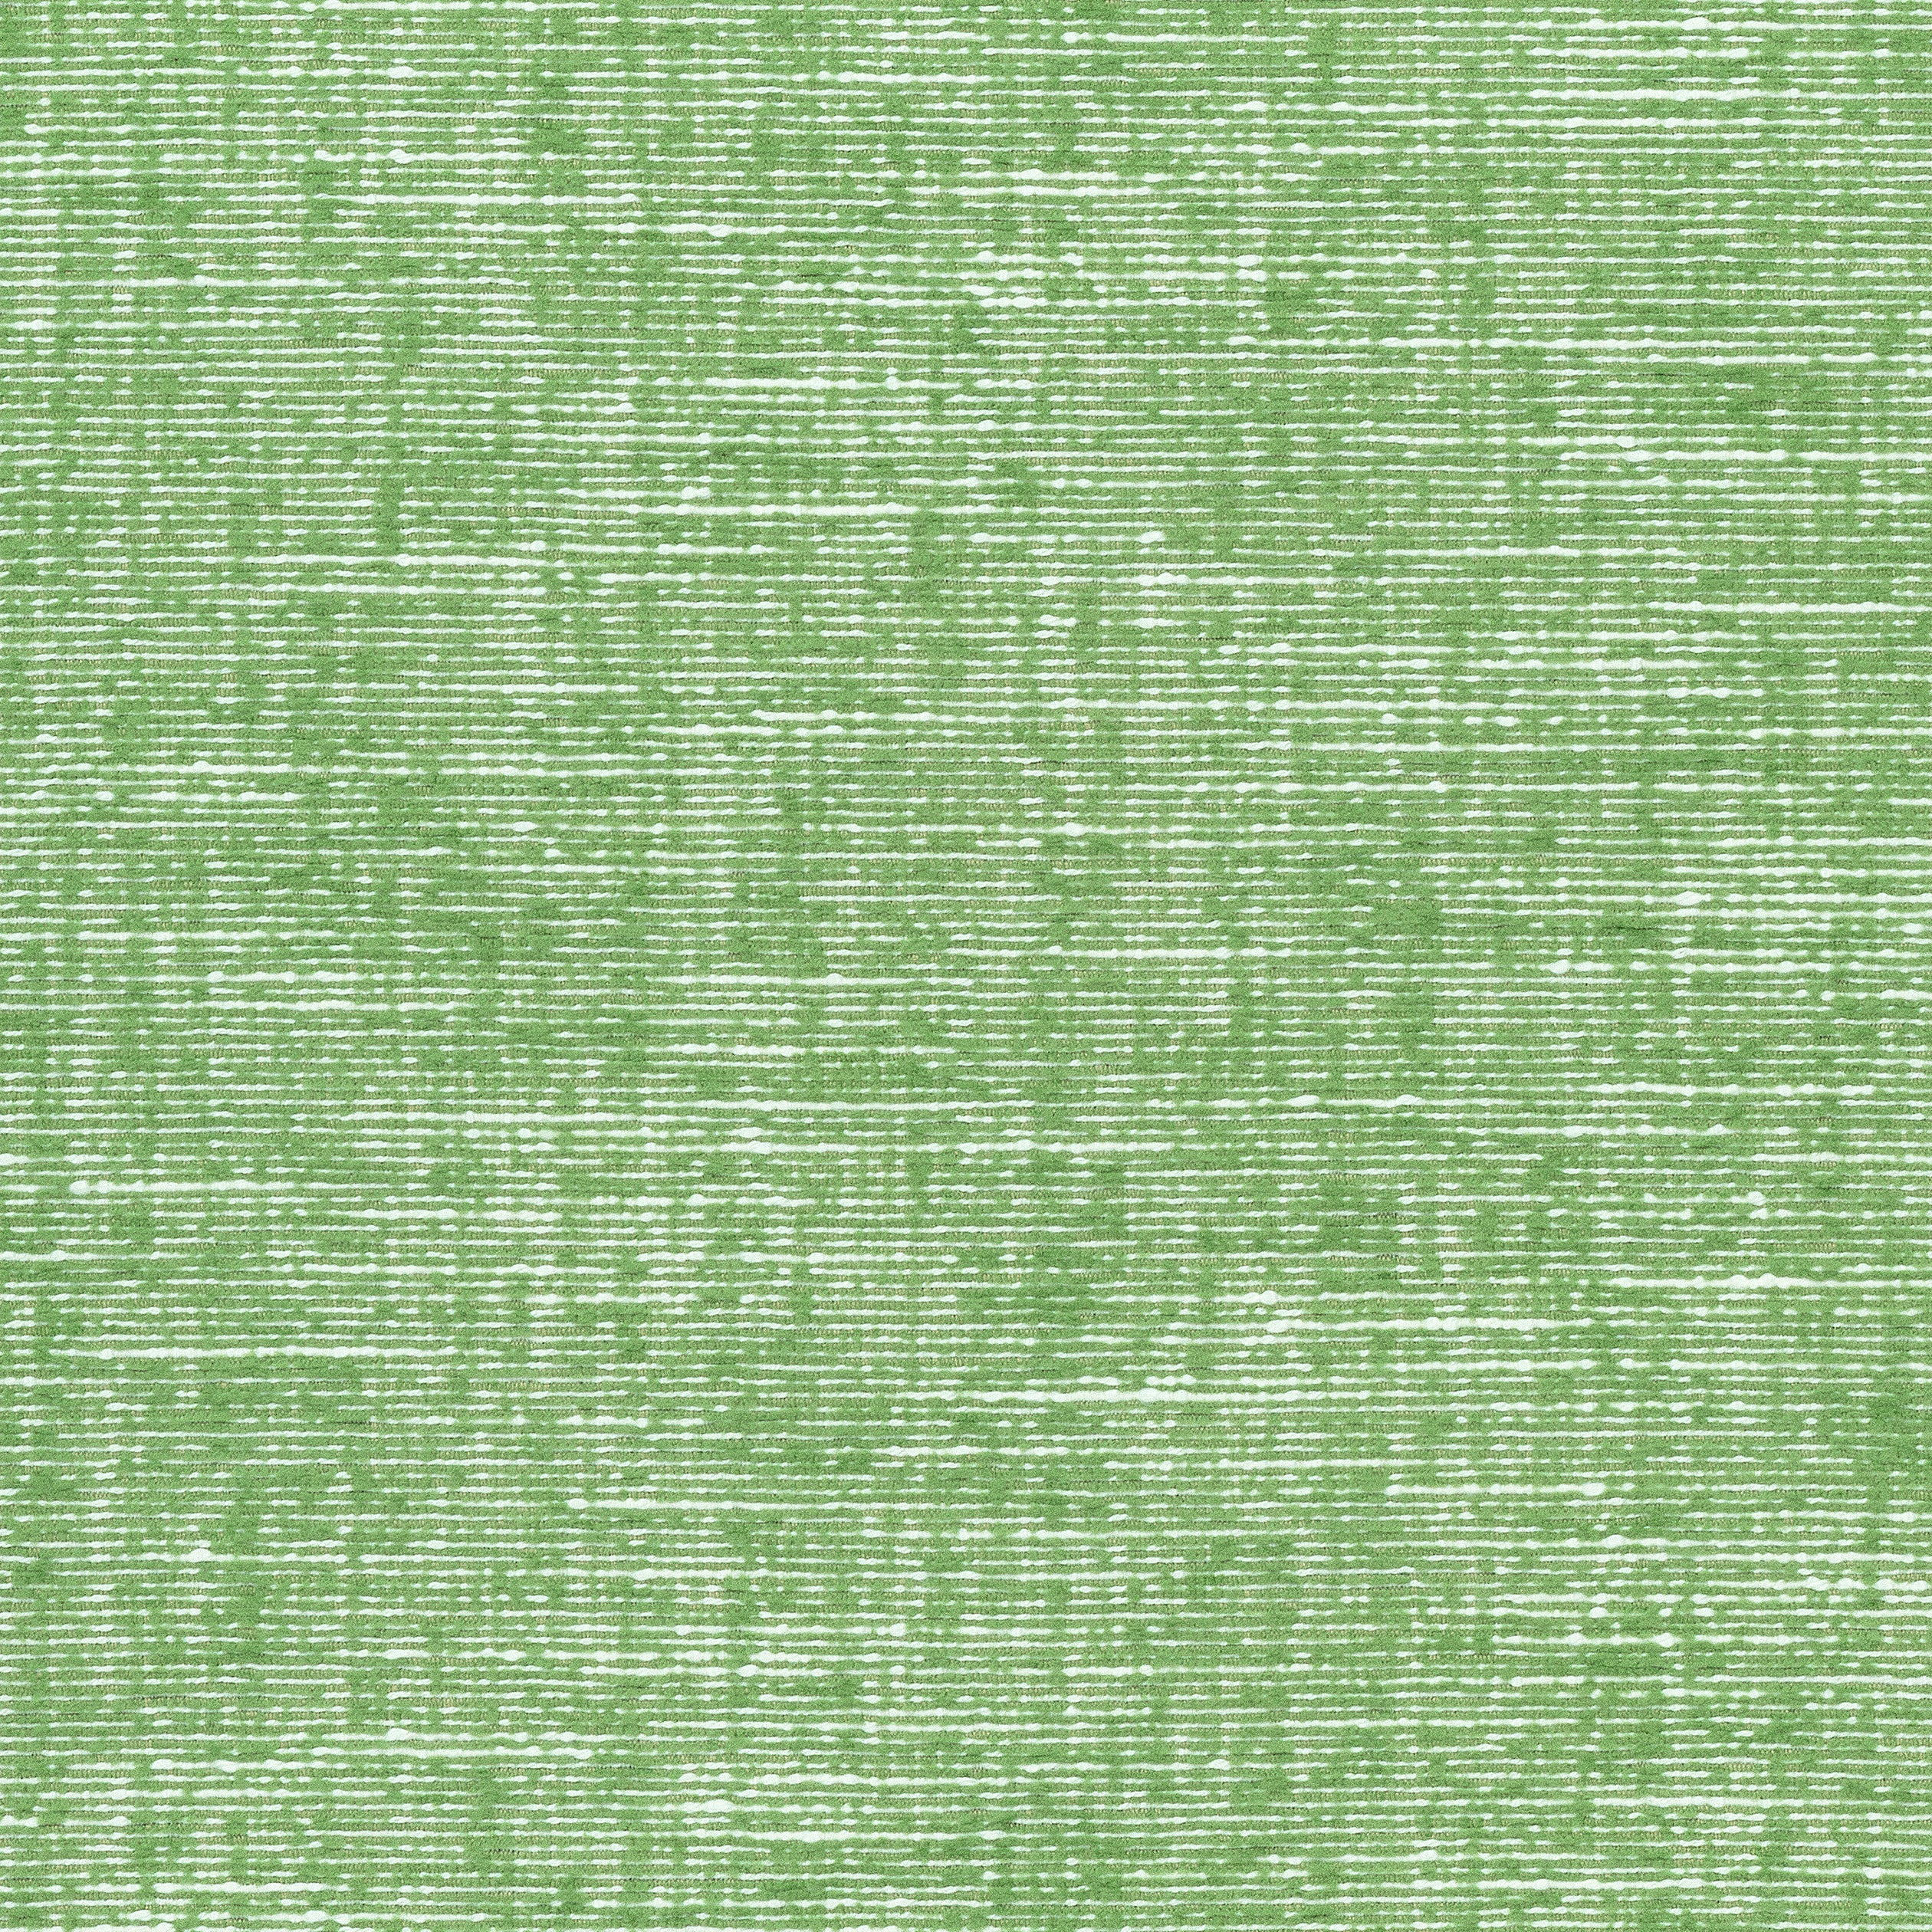 Freeport fabric in kelly green color - pattern number W74612 - by Thibaut in the Festival collection